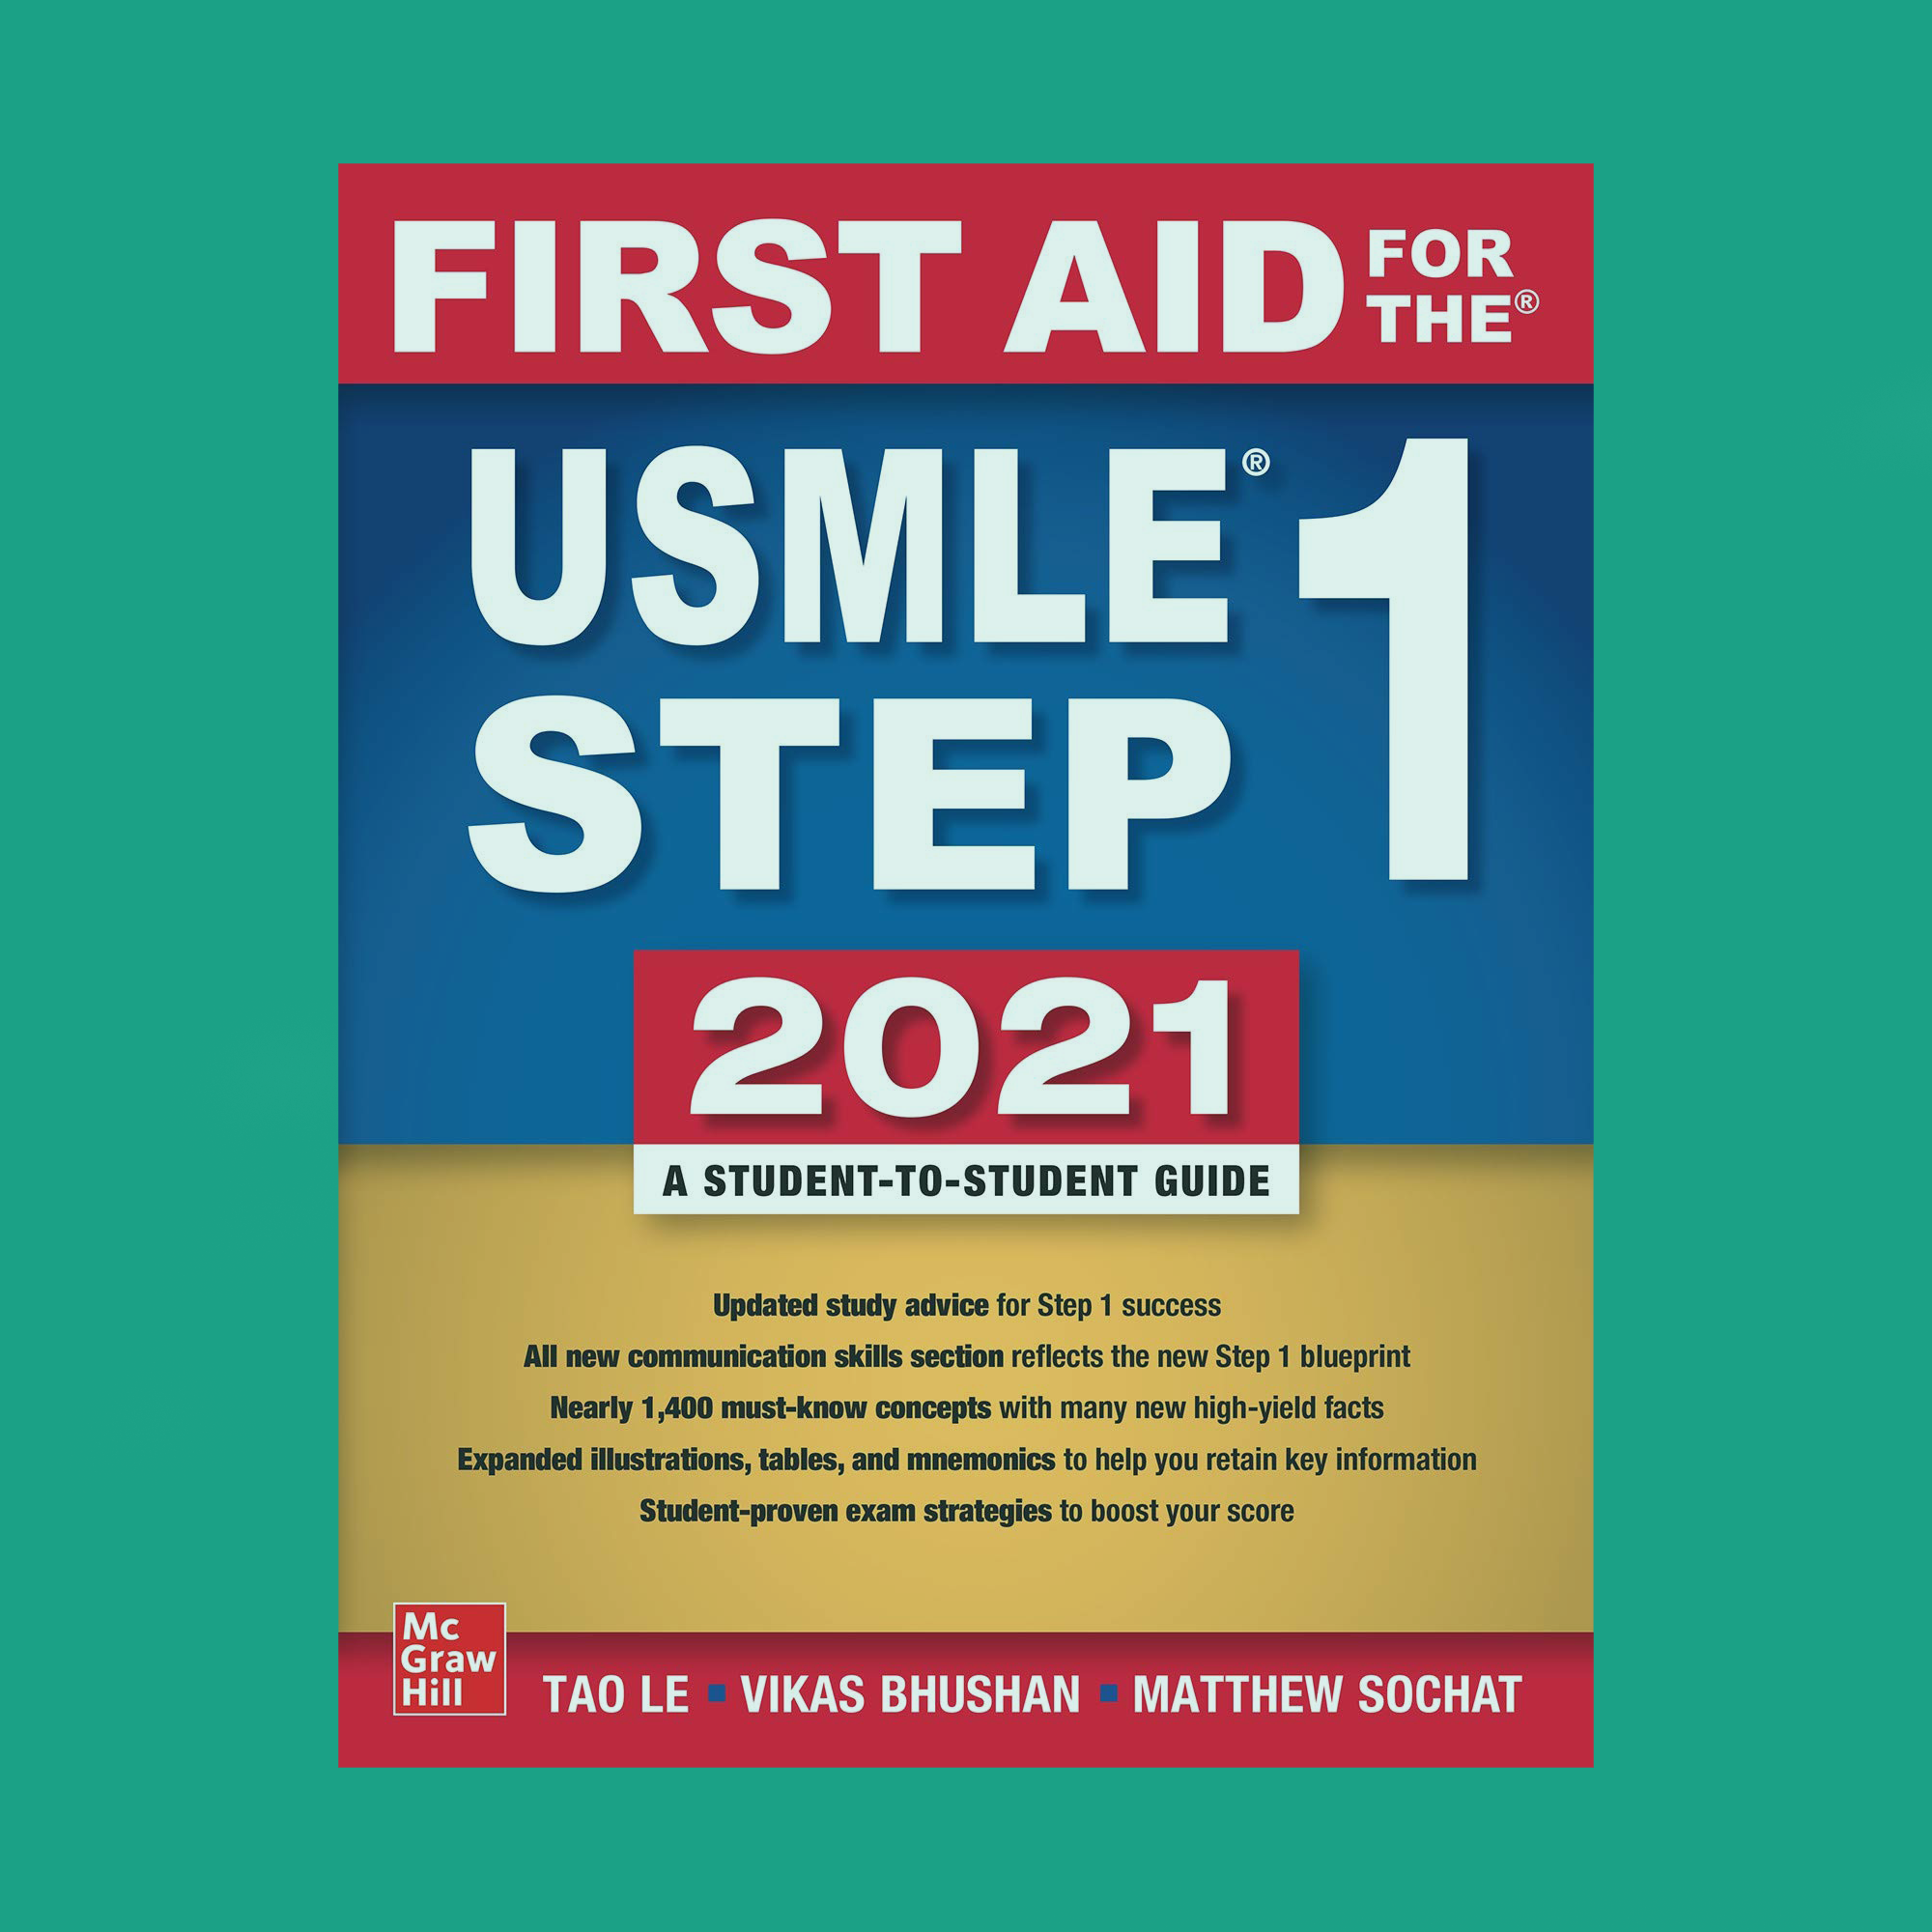 How Med Students Are Using First Aid in 2021